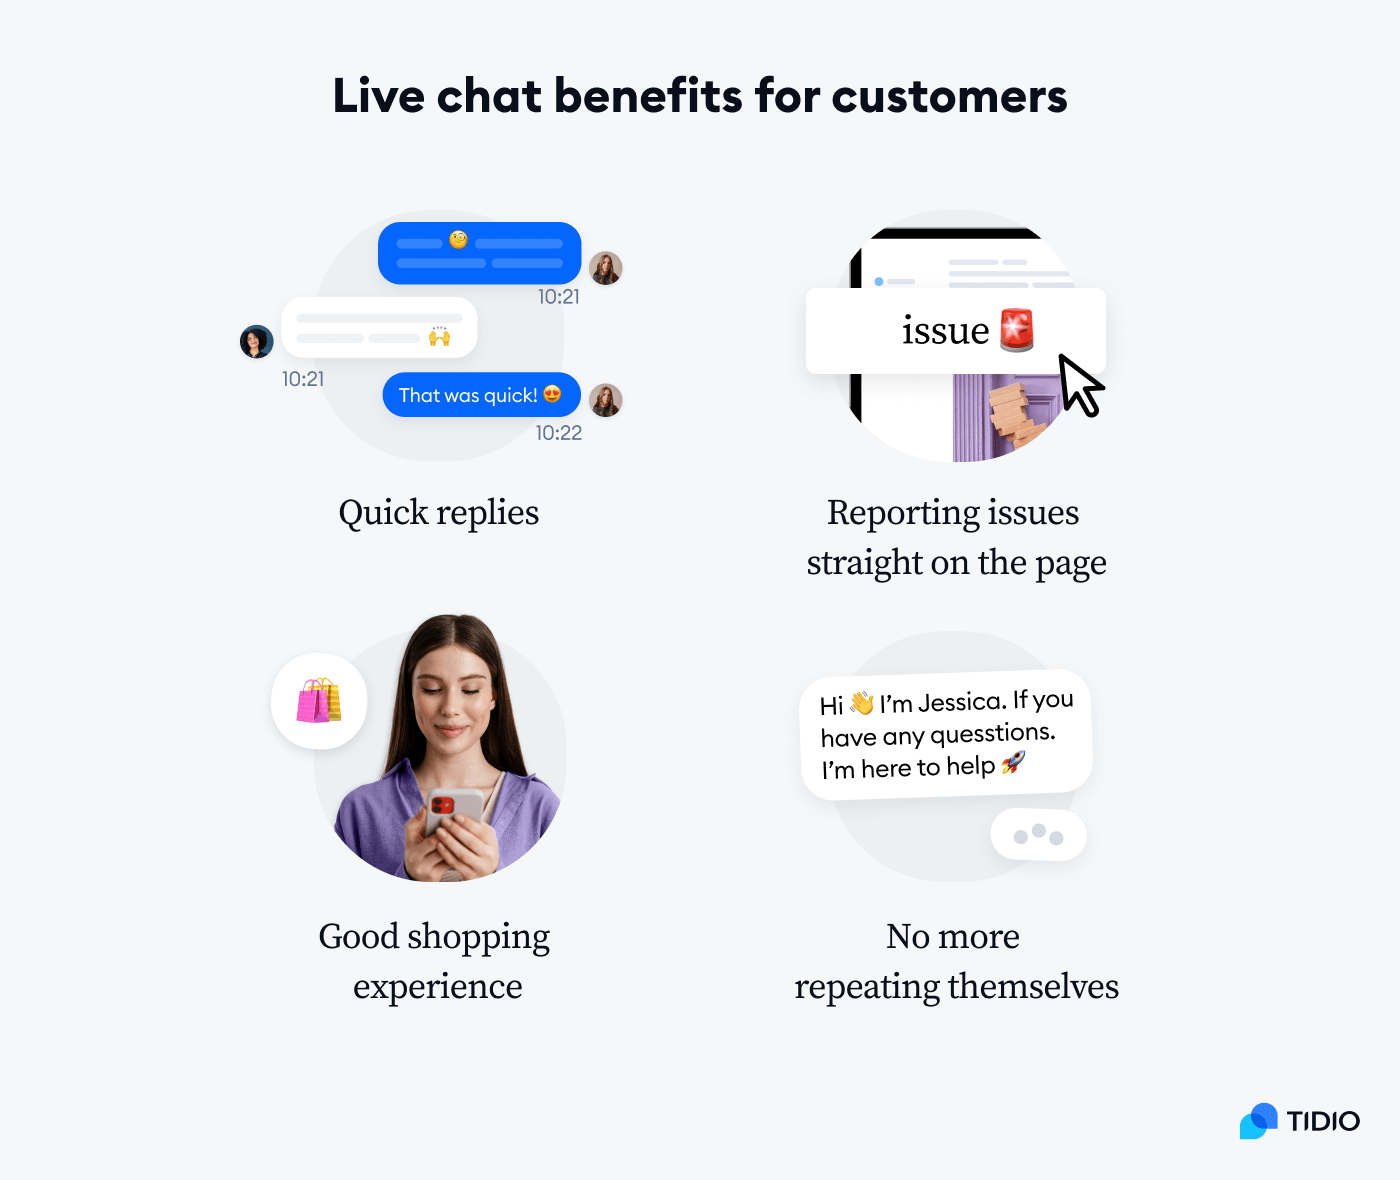 Live chat benefits for customers on image